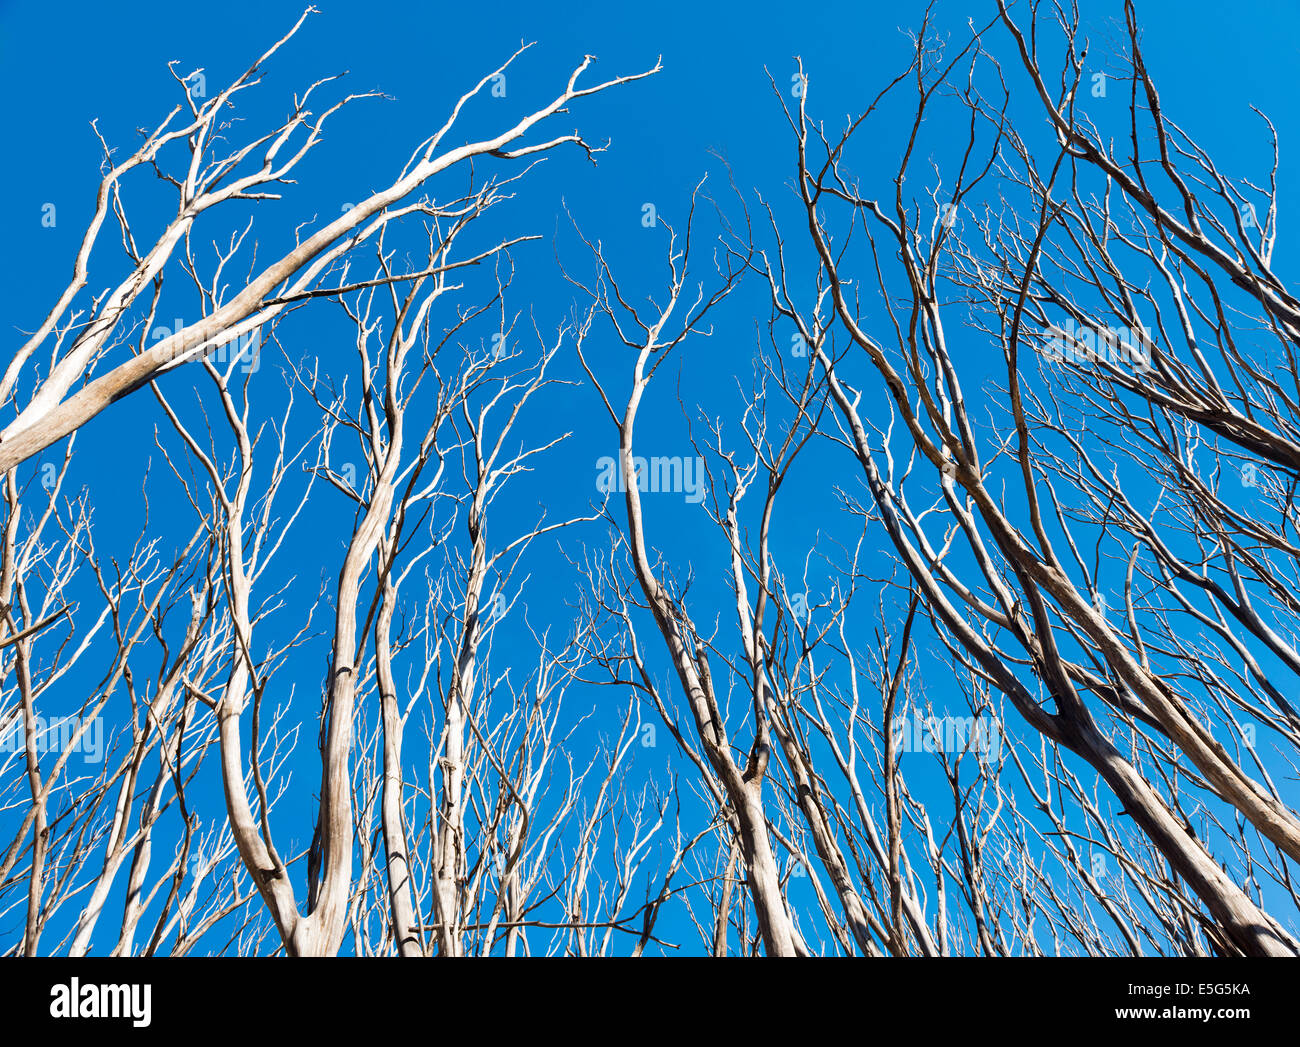 Dead trees without a single leaf after the Black Saturday bushfires in Victoria, Australia Stock Photo